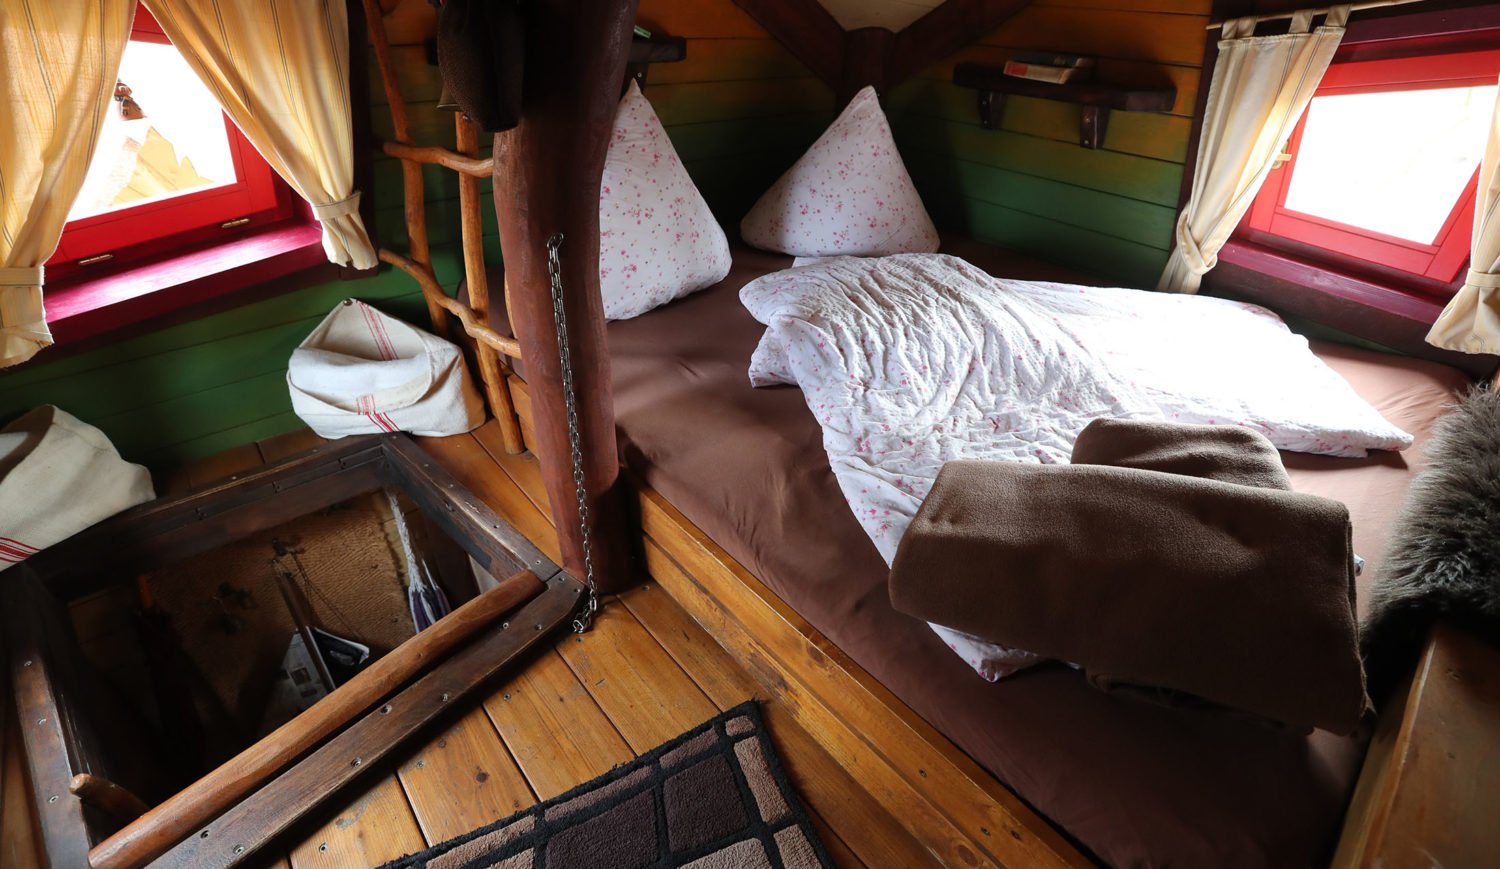 From the tree house to the earth cave - on the culture island there are over 200 very special overnight accommodations